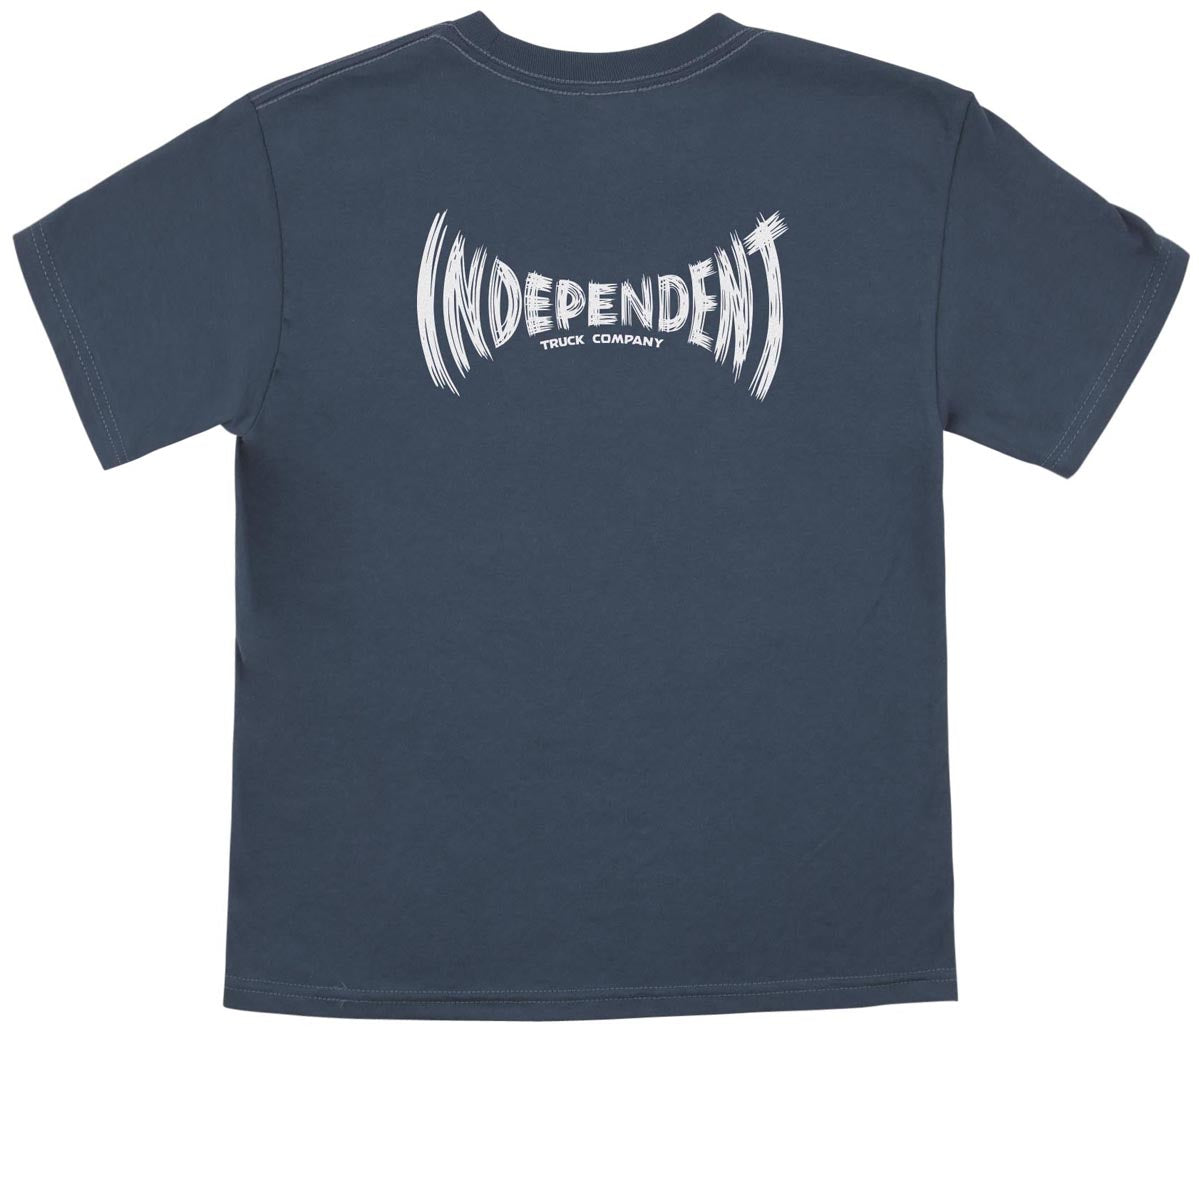 Independent Youth Carved Span T-Shirt - Steel Blue image 1